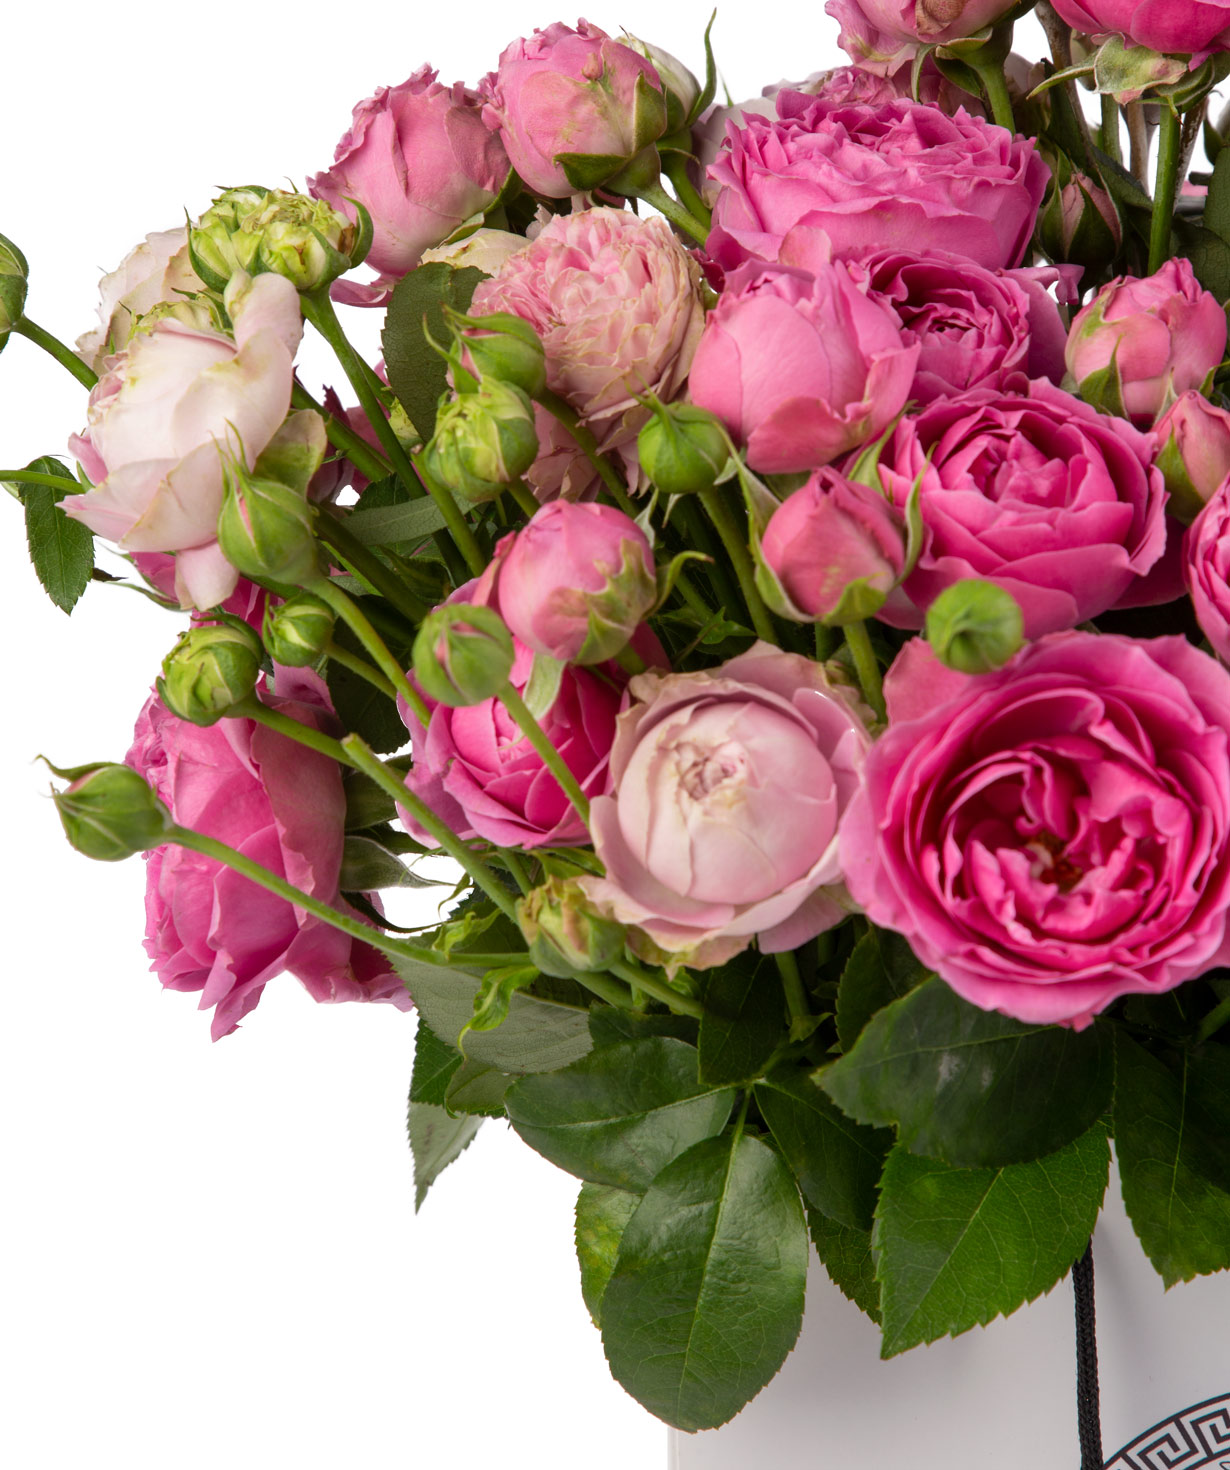 Composition `Dior` with peony roses